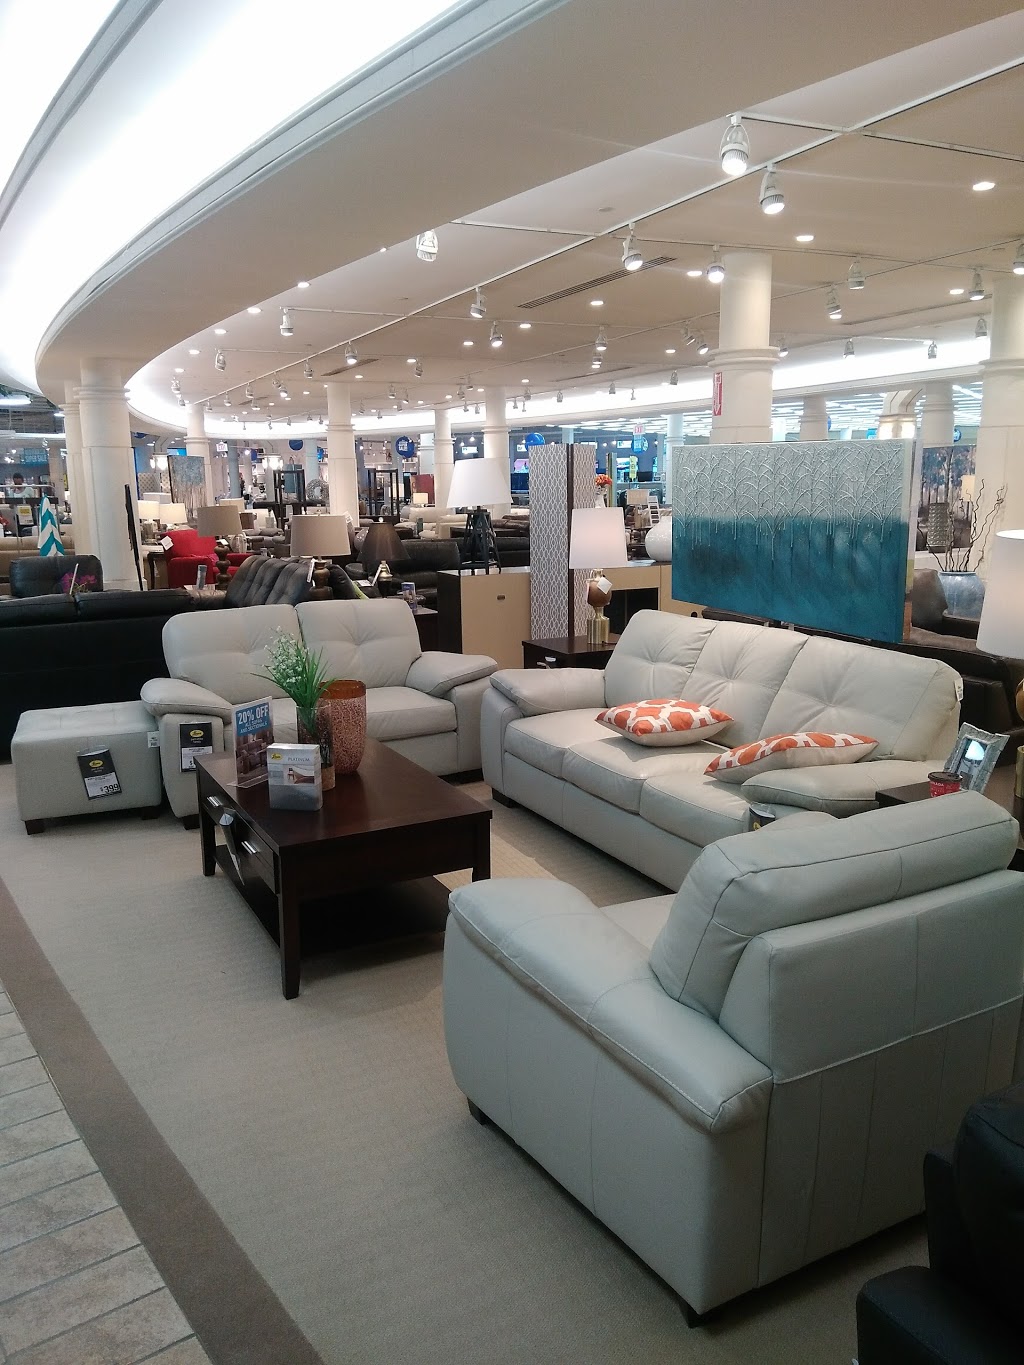 Leons Furniture | electronics store | 10 Suntract Rd, North York, ON M9N 3N9, Canada | 4162438300 OR +1 416-243-8300